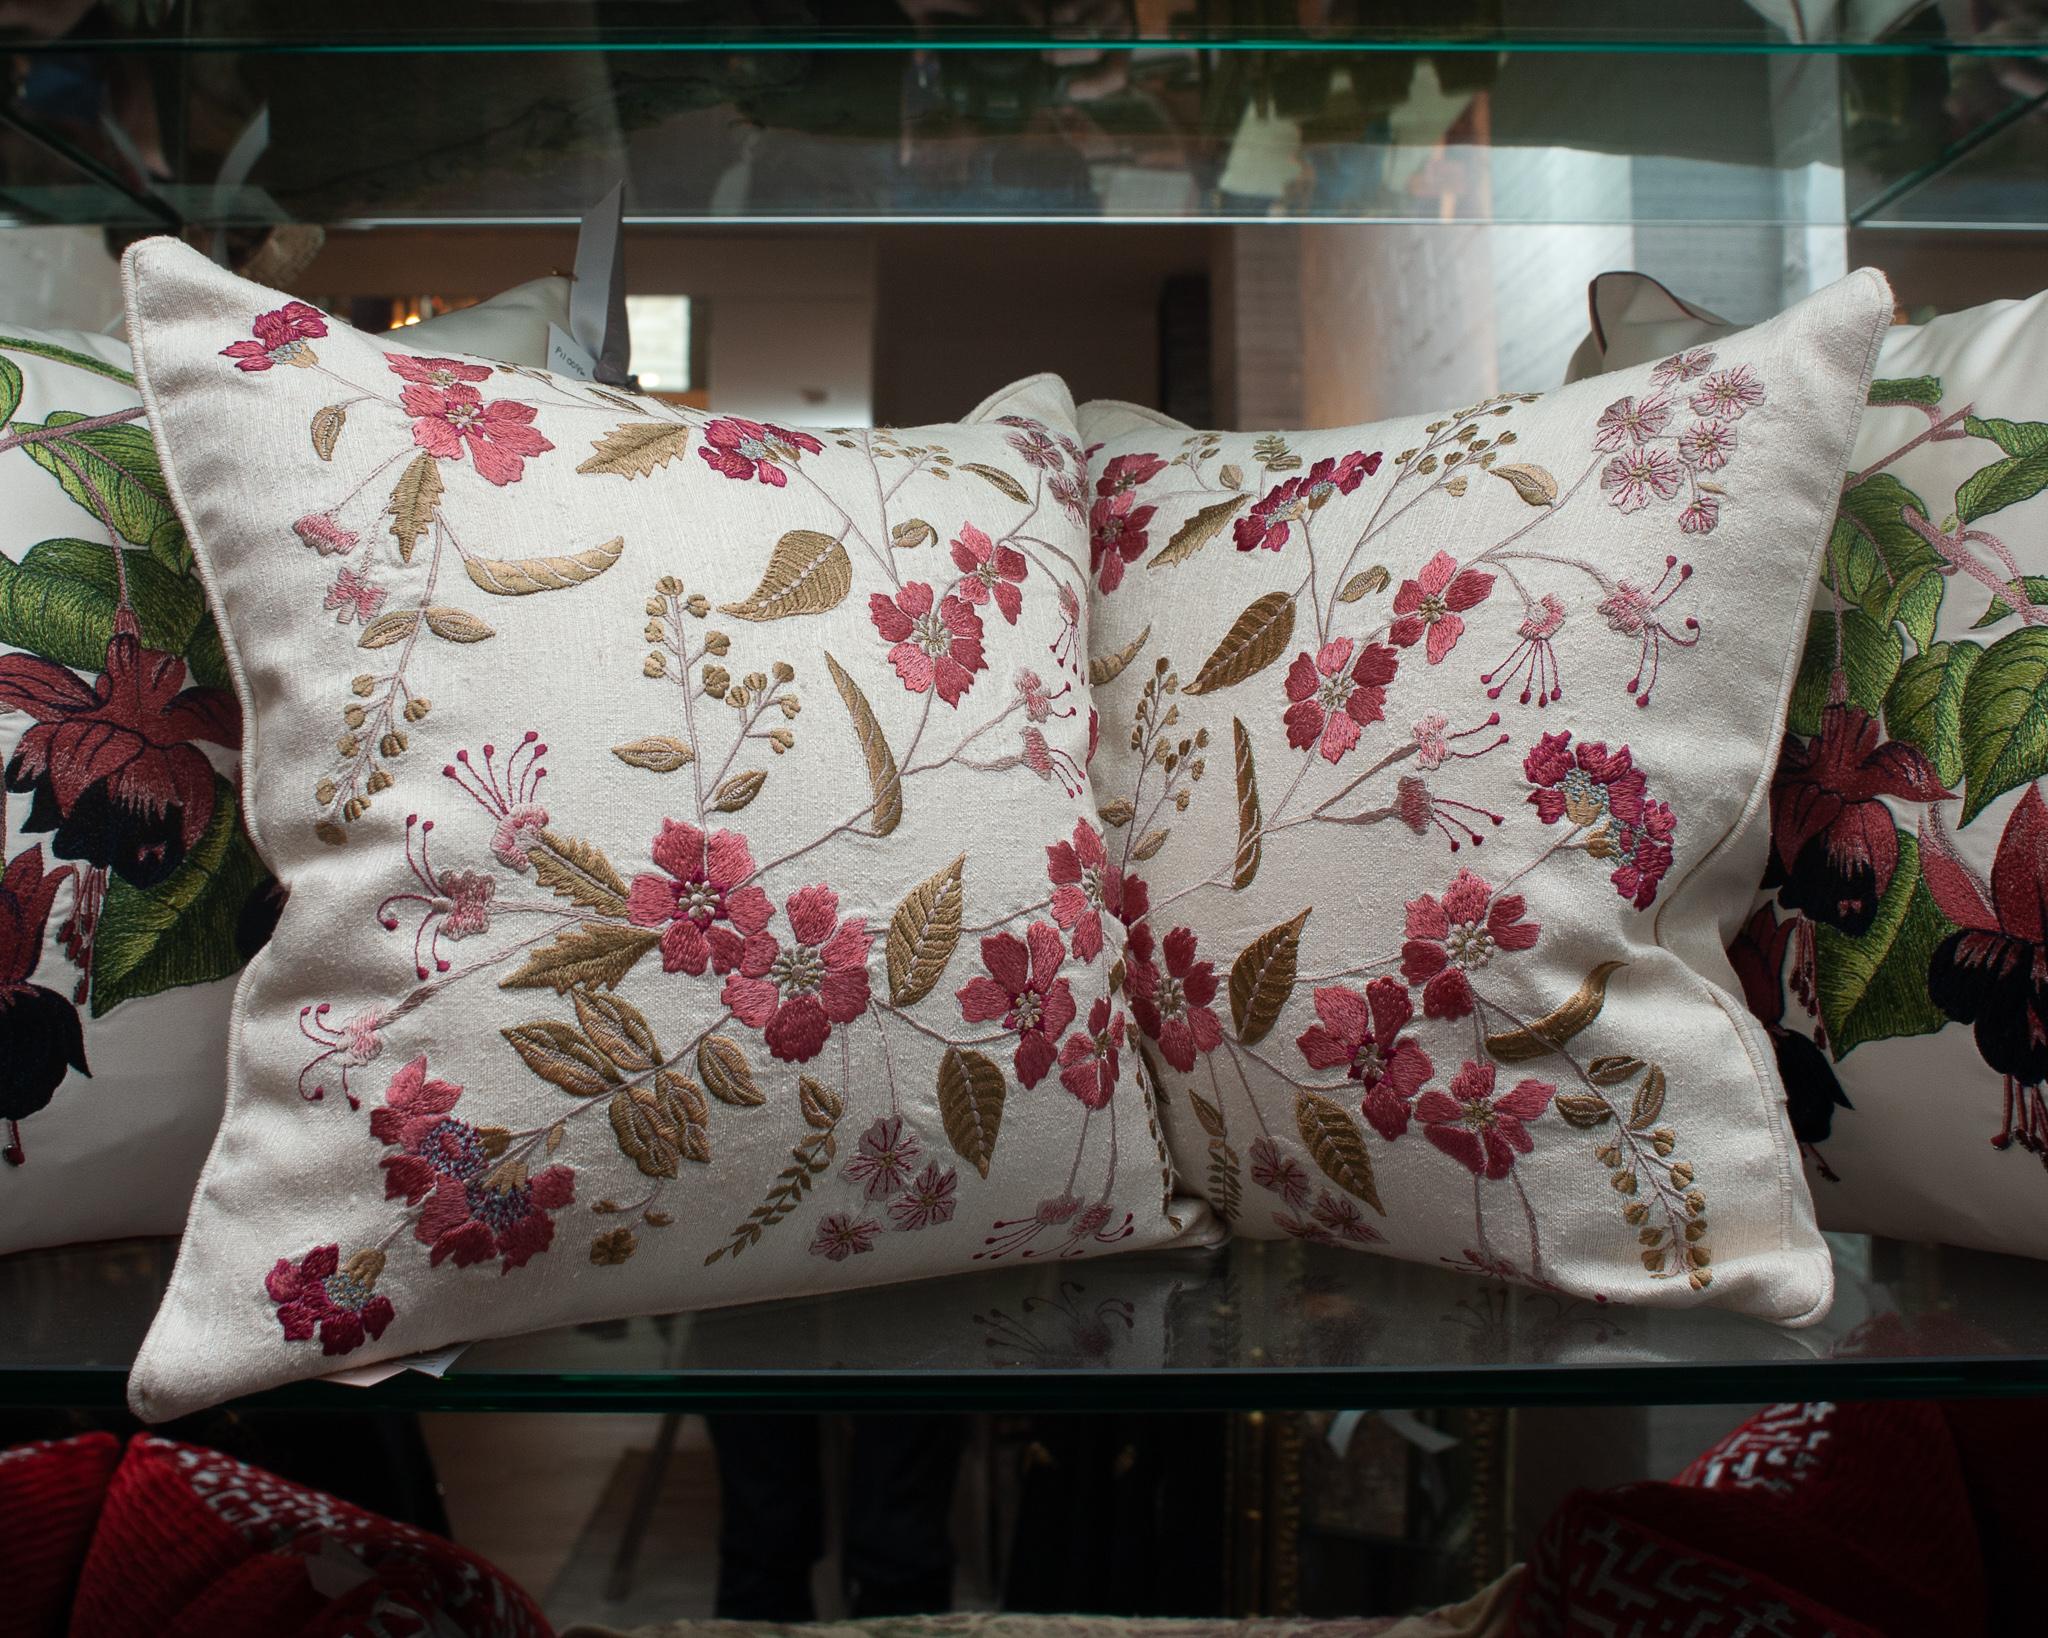 German Contemporary Pair of Tassia Silk Pillows with Ornate Floral Embroidery